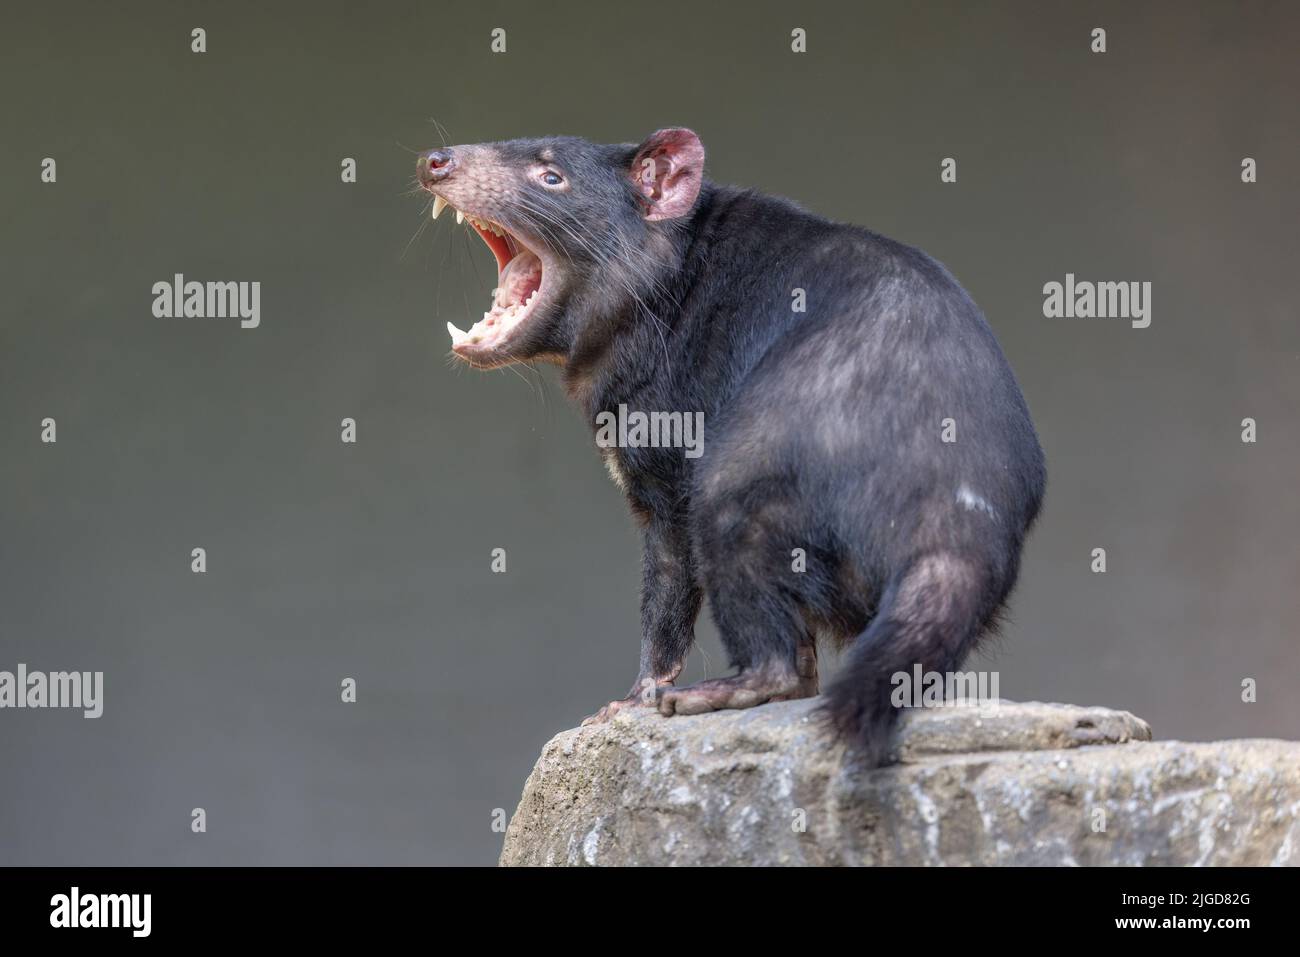 Tasmanian Devil (Sarcophilus harrisii), head lifted with mouth wide open, displaying teeth and tongue, in aggressive mood. Stock Photo